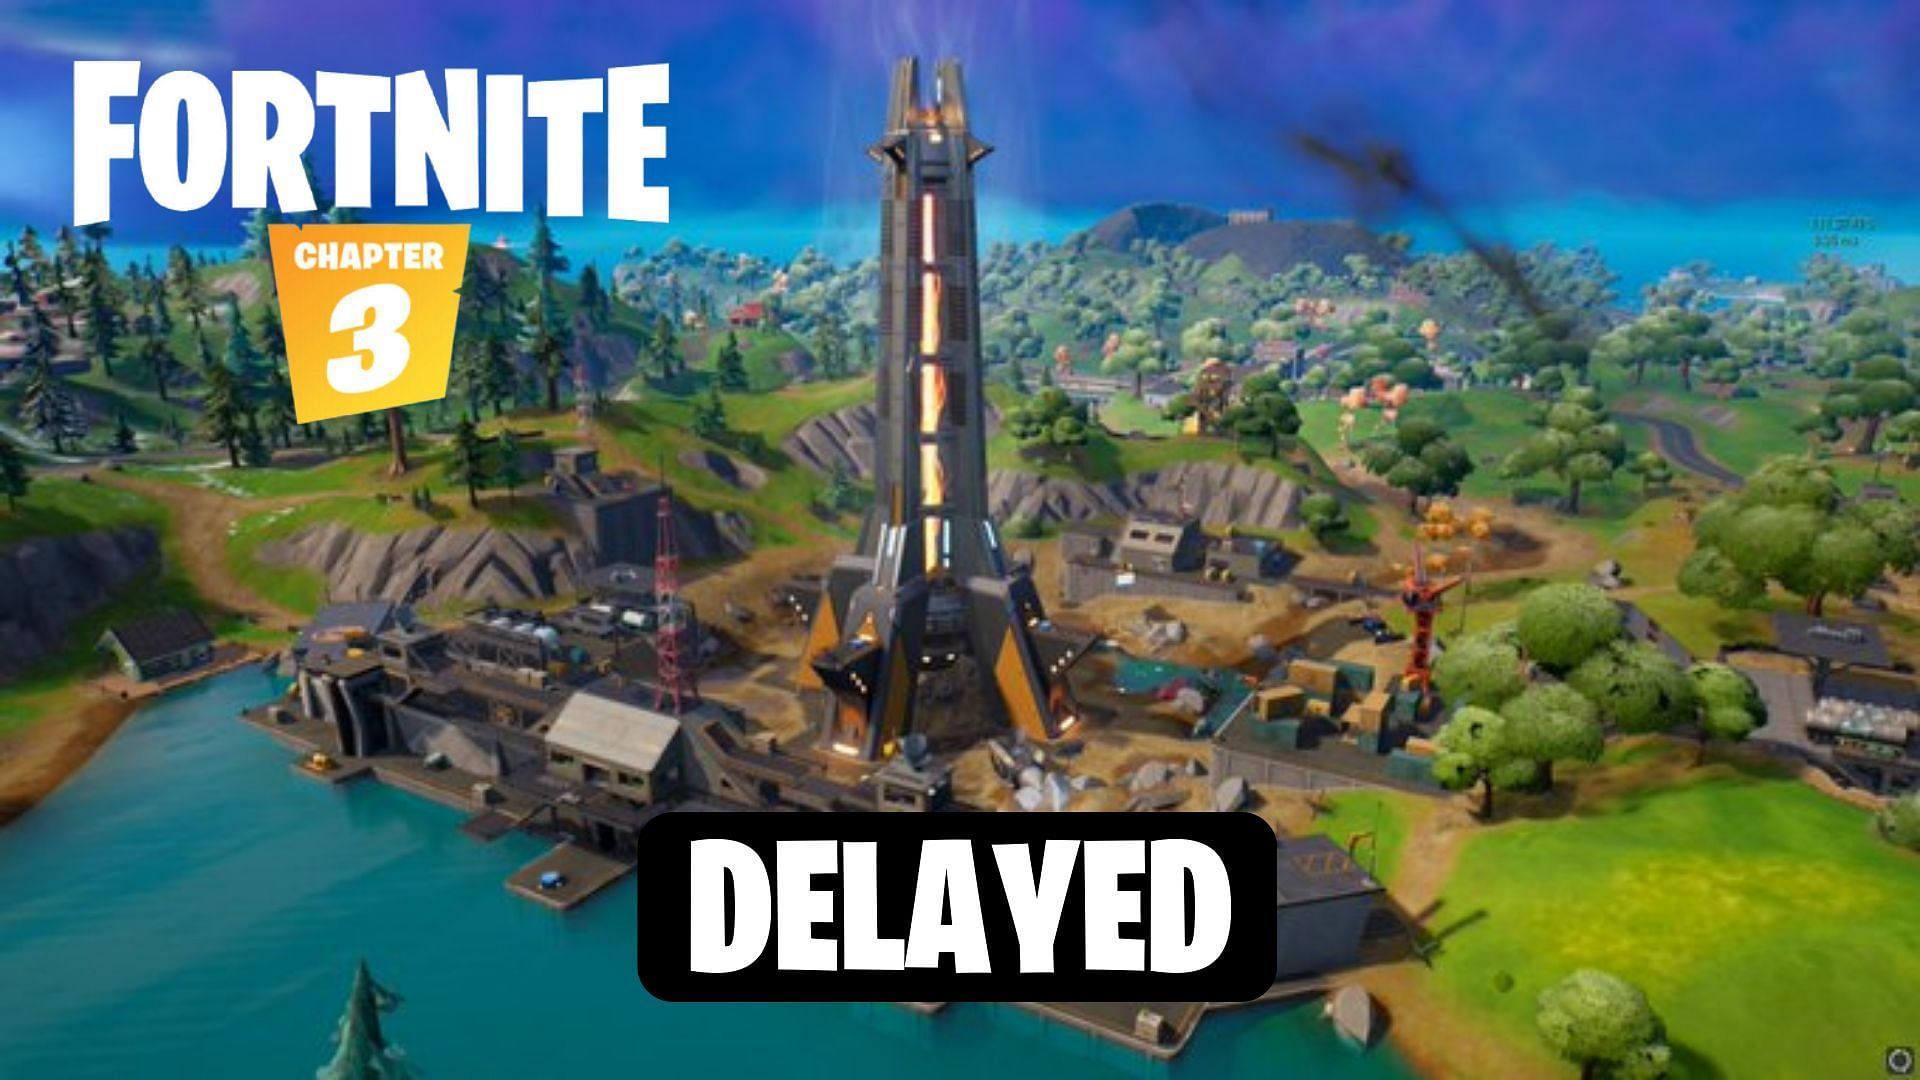 Leaks say that Fortnite Chapter 3 Season 3 will be pushed back again while players wait for the live event where the device will destroy the island. After beating the Imagined Order and taking back territories with The Seven, the player base has been looking forward to the new season.